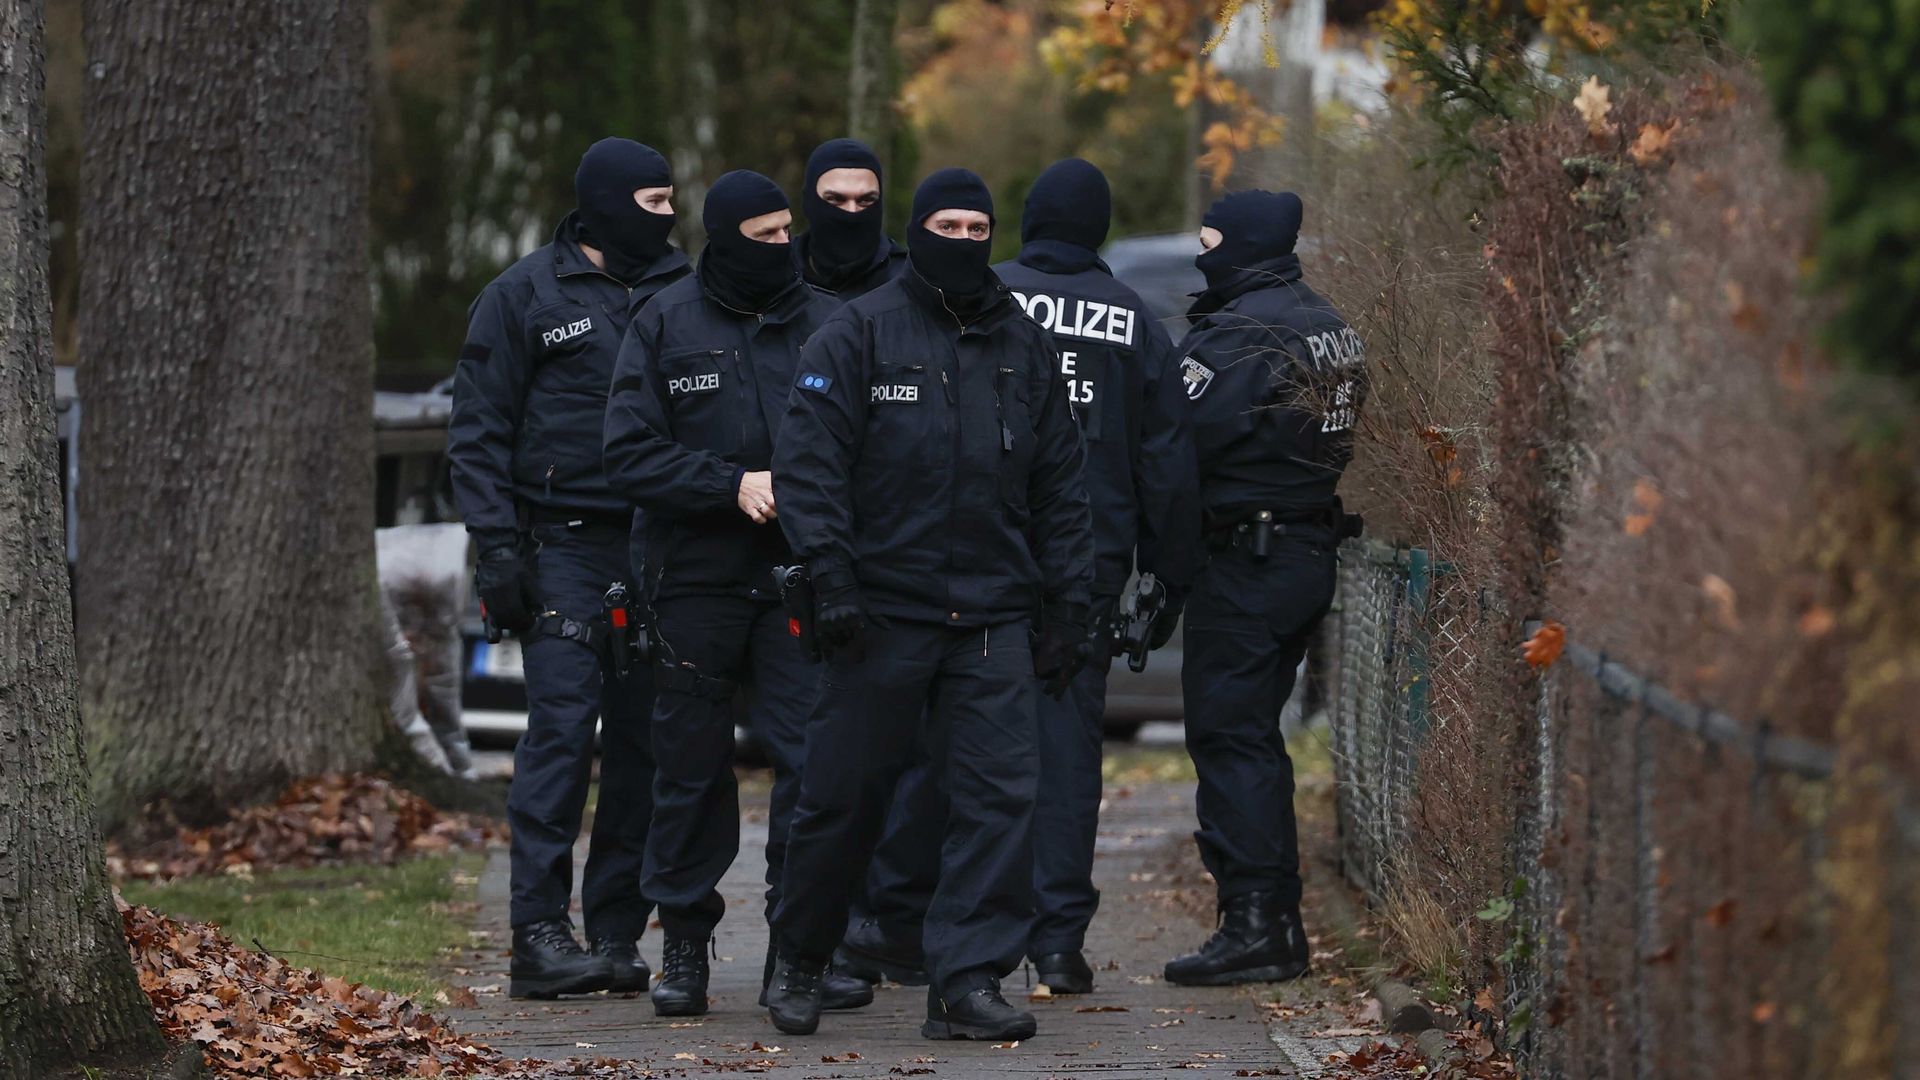 Police officers work during a raid in Berlin, Germany, on December 07, 